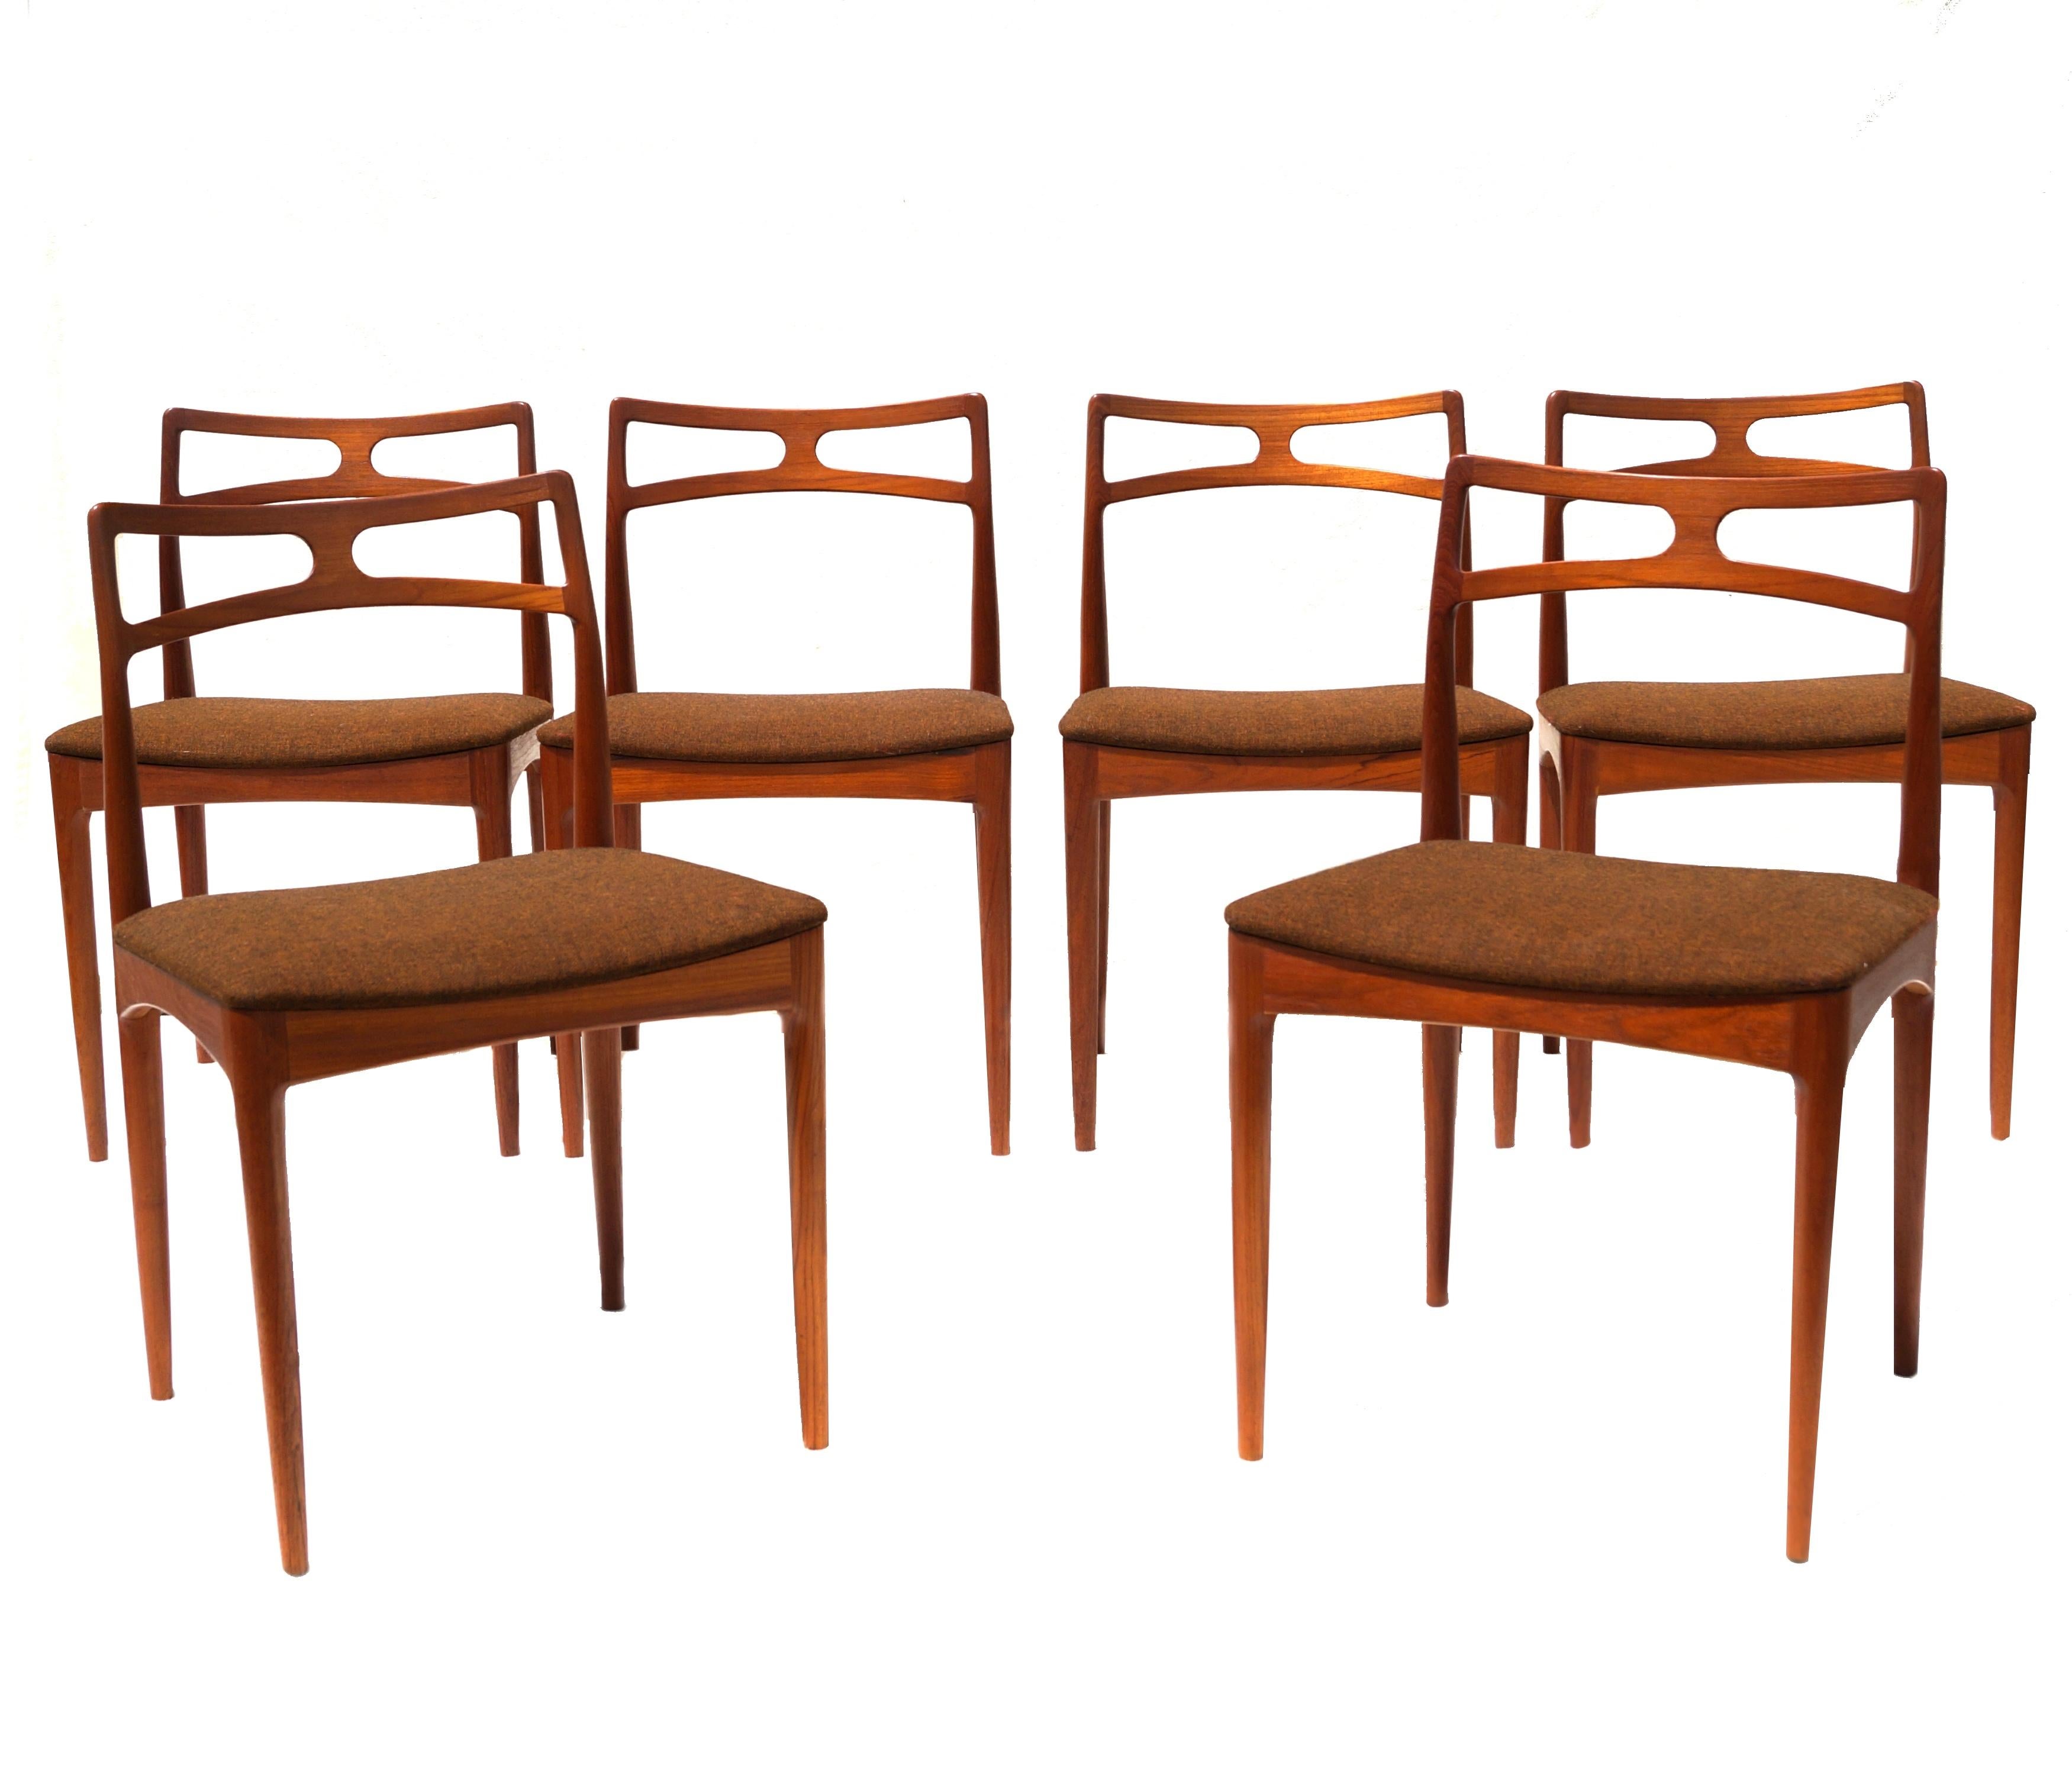 Set of 6 Johannes Andersen made by Christian Linnebergs Møbelfabrik Teak Danish Modern Diningroom Chairs, Denmark.
If you are in the New Jersey , New York City Metro Area , please contact us with your delivery zipcode, as we may be able to deliver